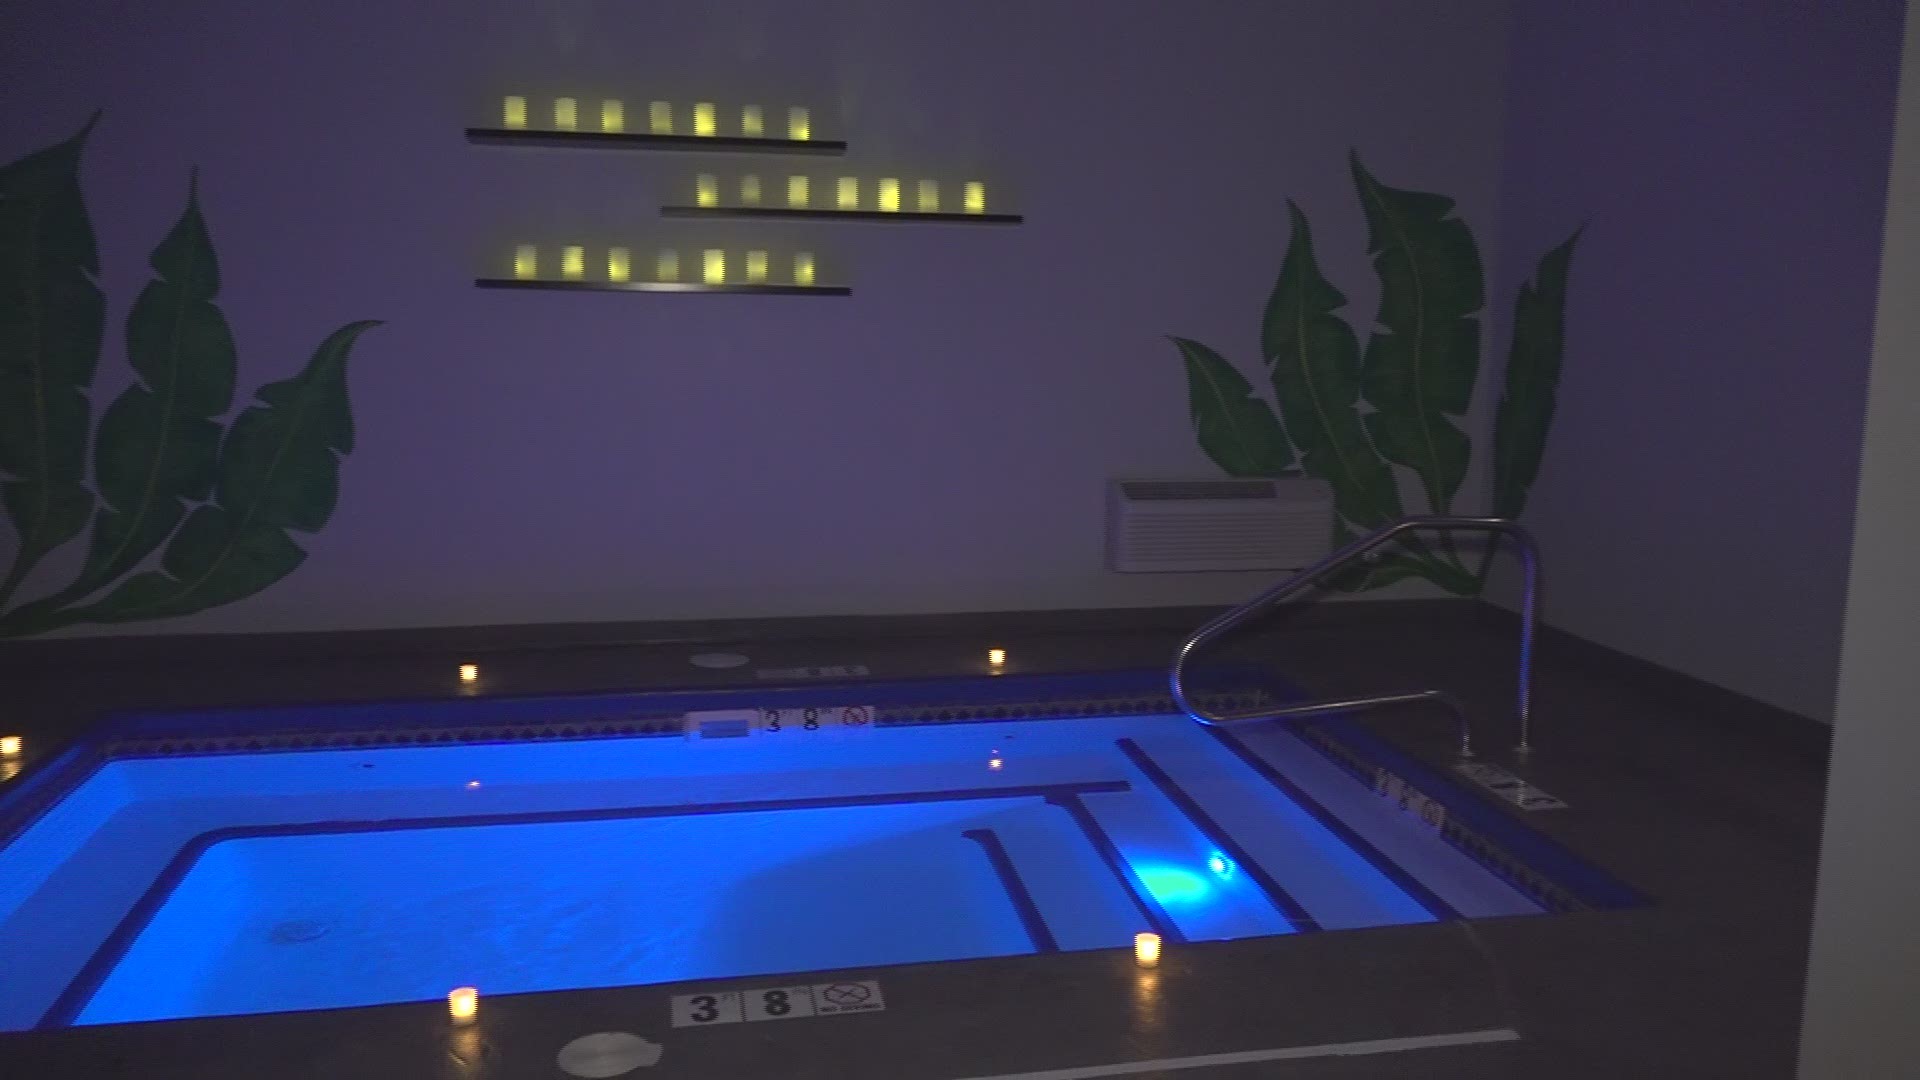 A boutique hotel just opened with a jacuzzi and swimming pool in each suite.